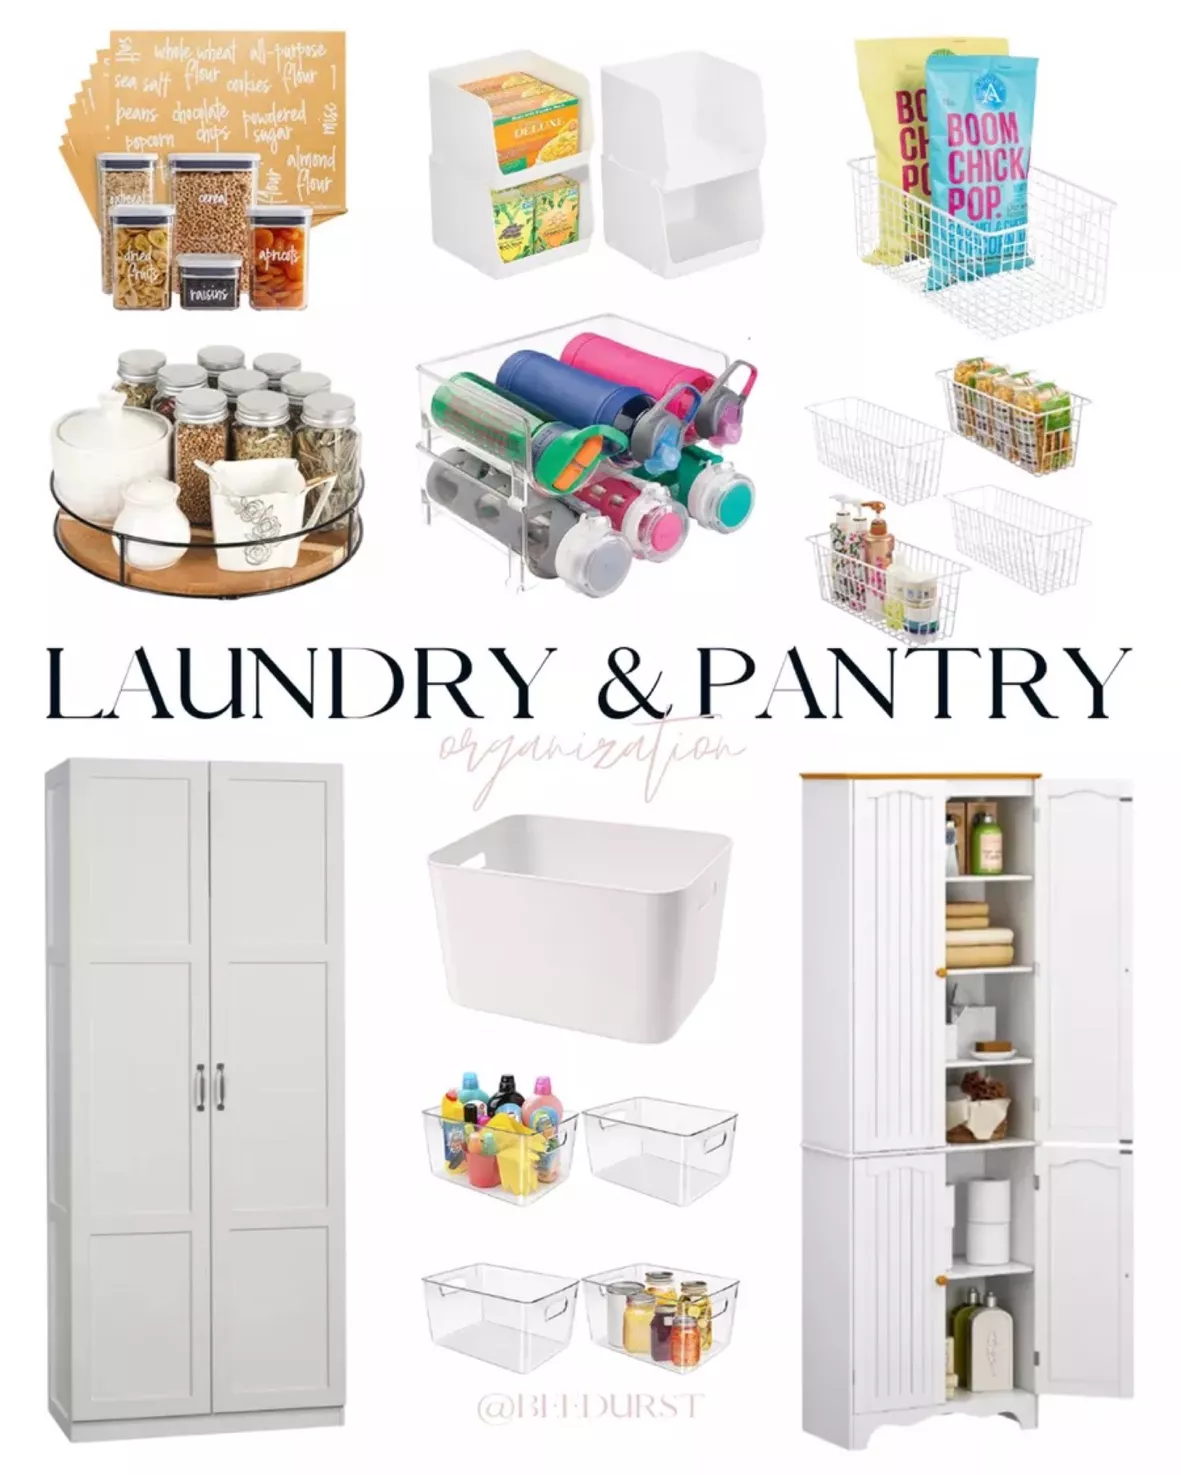 10 Of The Best Laundry Cabinet Organizers On , According To